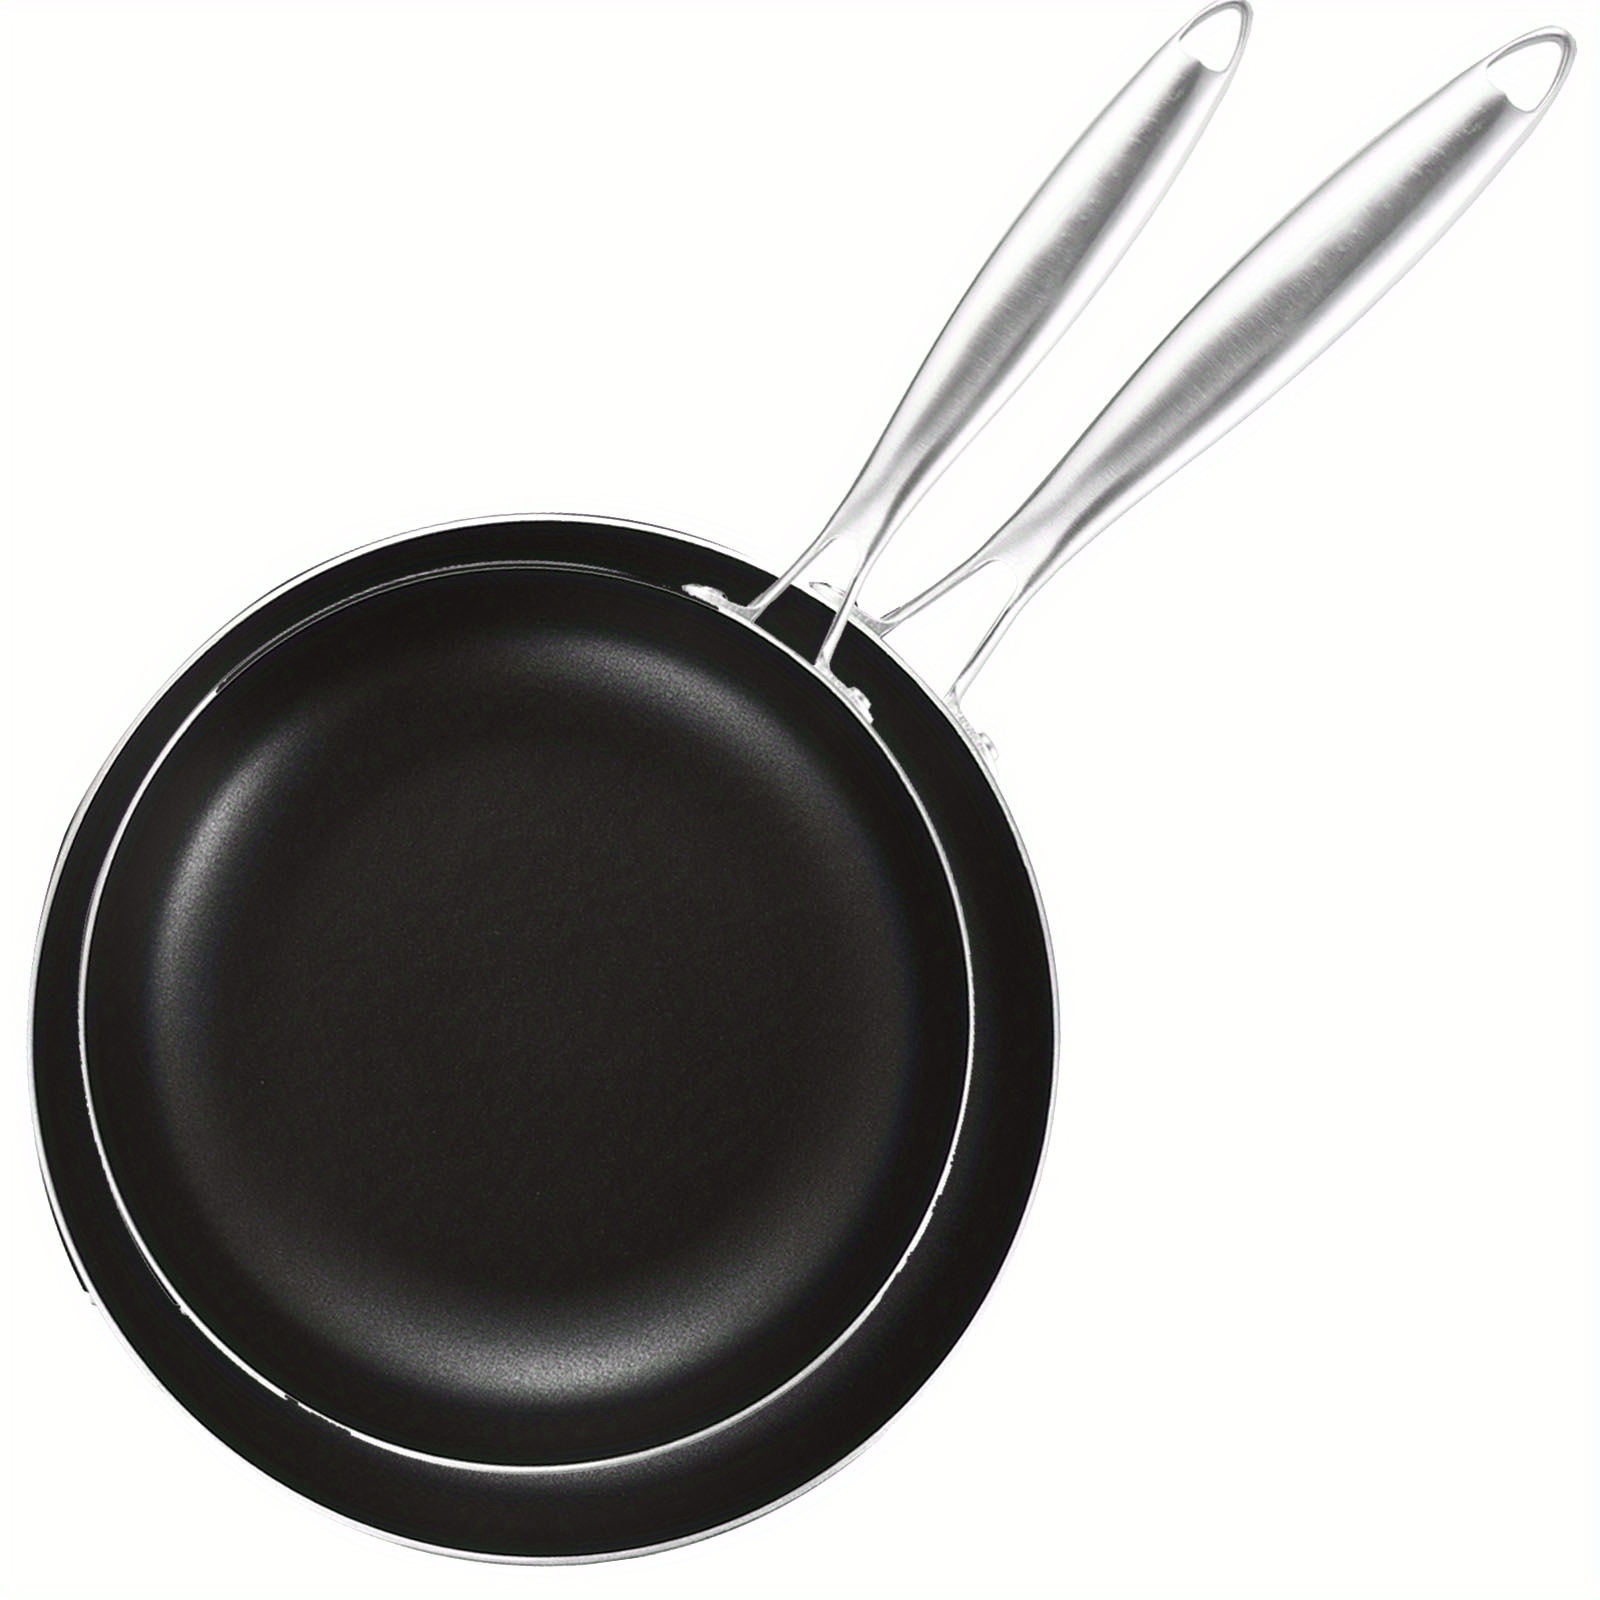 1pc 8 Inch Non-stick Frying Pan, Black, Suitable For Cooking Eggs Etc.